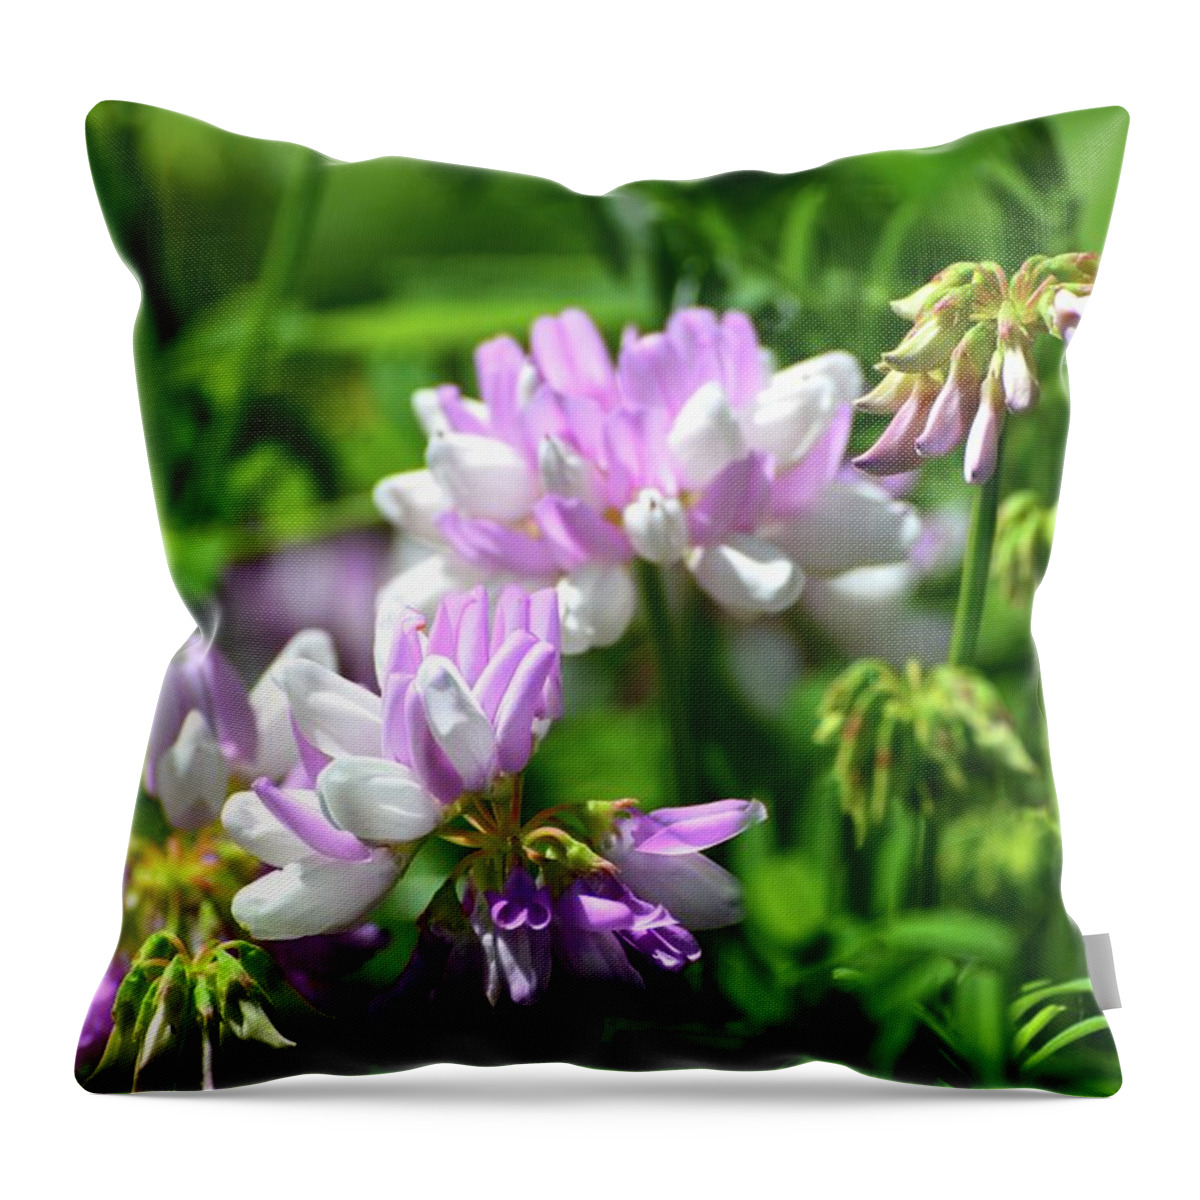 Abstract Throw Pillow featuring the photograph Still Growing by Lyle Crump